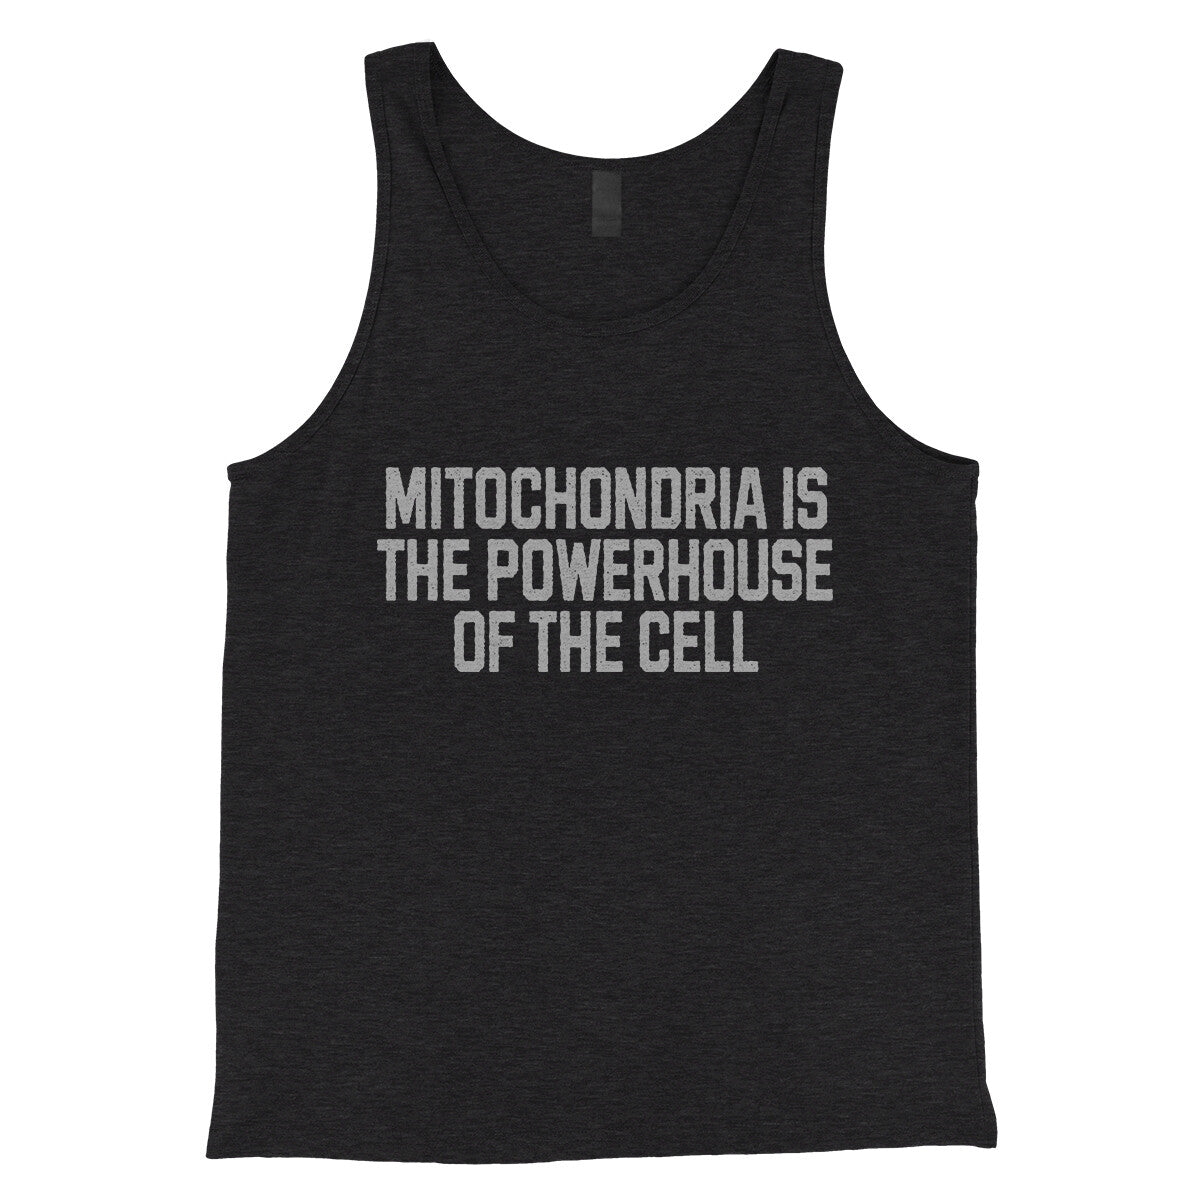 Mitochondria is the Powerhouse of the Cell in Charcoal Black TriBlend Color